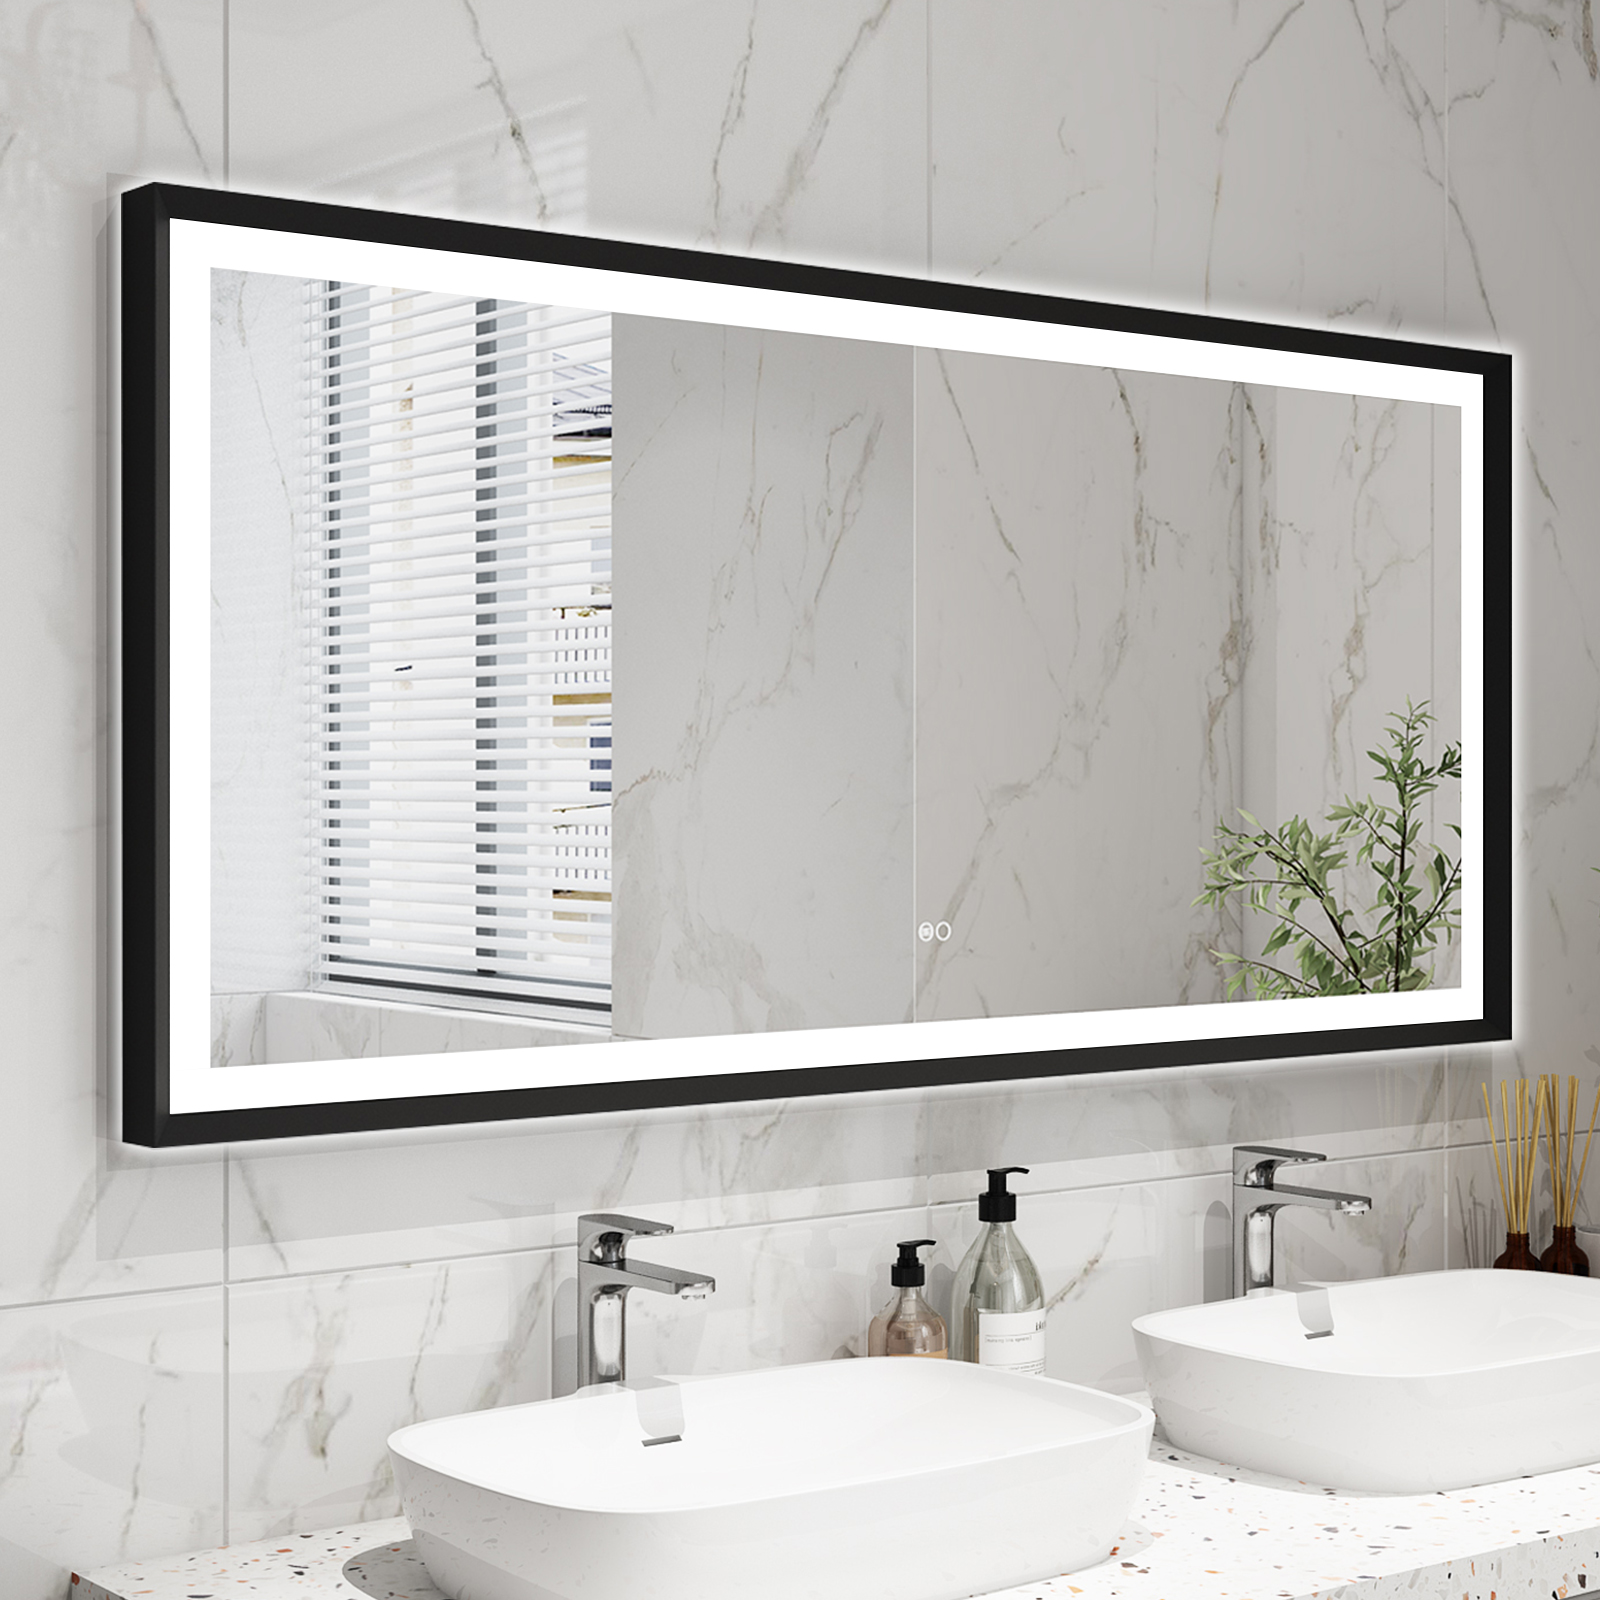 Forclover 60 x 28 inch LED Bathroom Mirror, Backlit and Front Lighted Mirror  for Bathroom, Wall Mounted Bathroom Vanity Framed Mirror Includes Dimmer,  Defogger, Vertical Horizontal, Matte Black